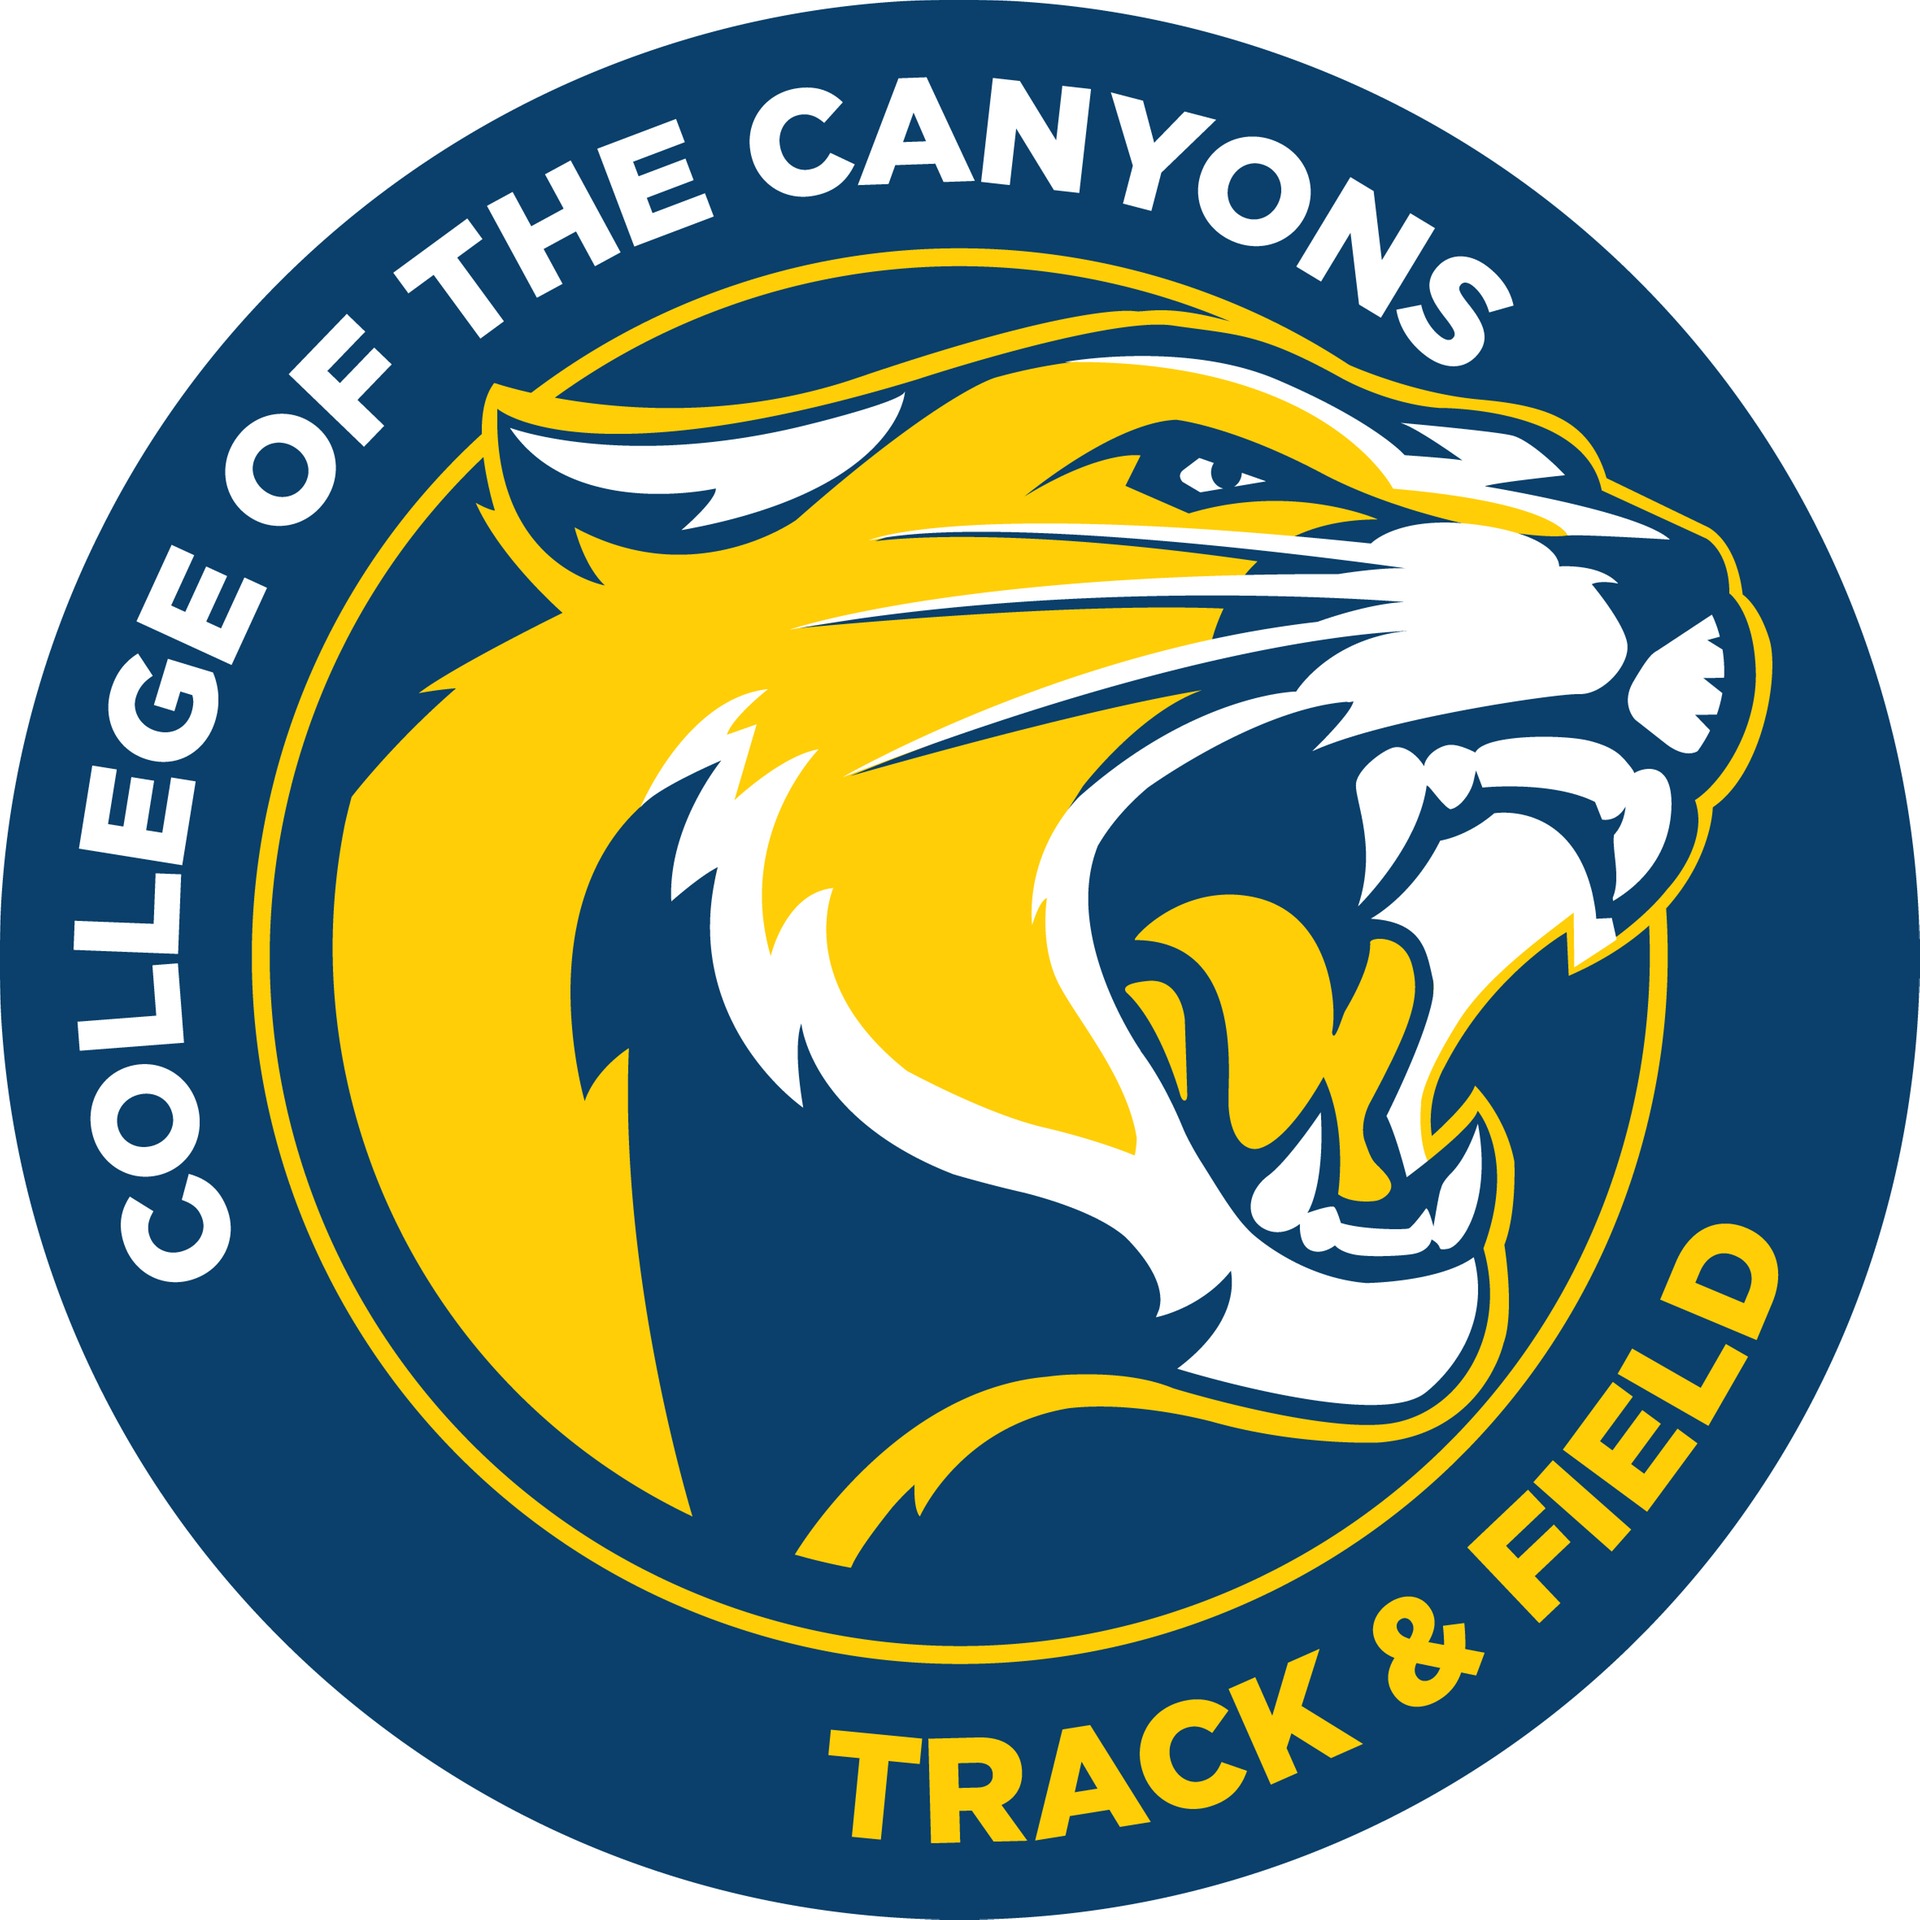 College of the Canyons track & field logo.